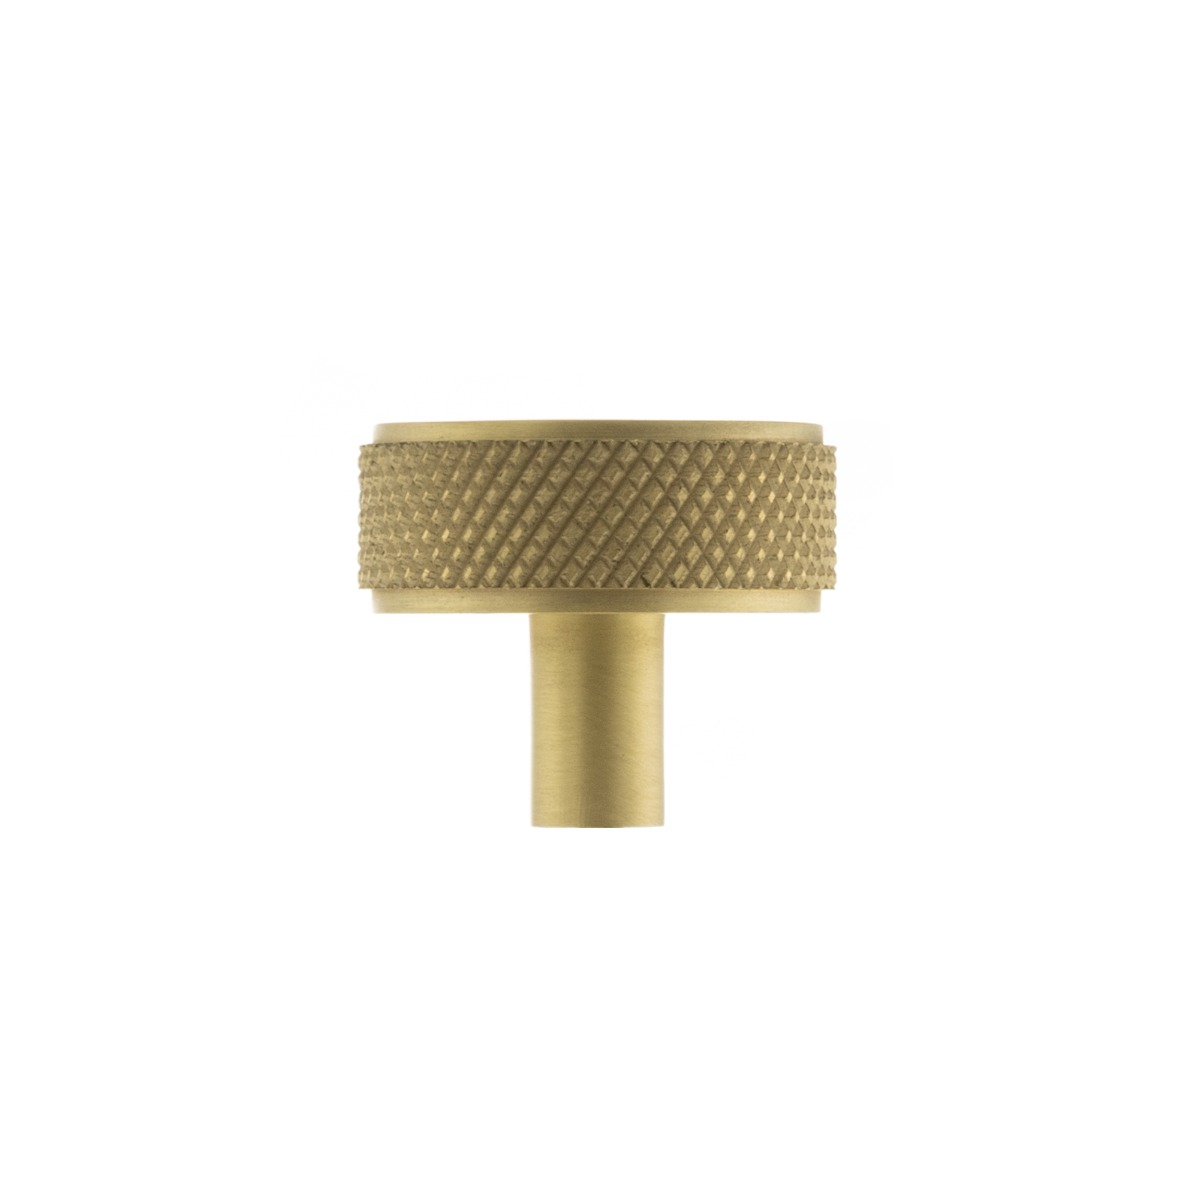 Millhouse Brass Hargreaves Disc Knurled Cabinet Knob on Concealed Fix - Satin Brass MHCK1935SB